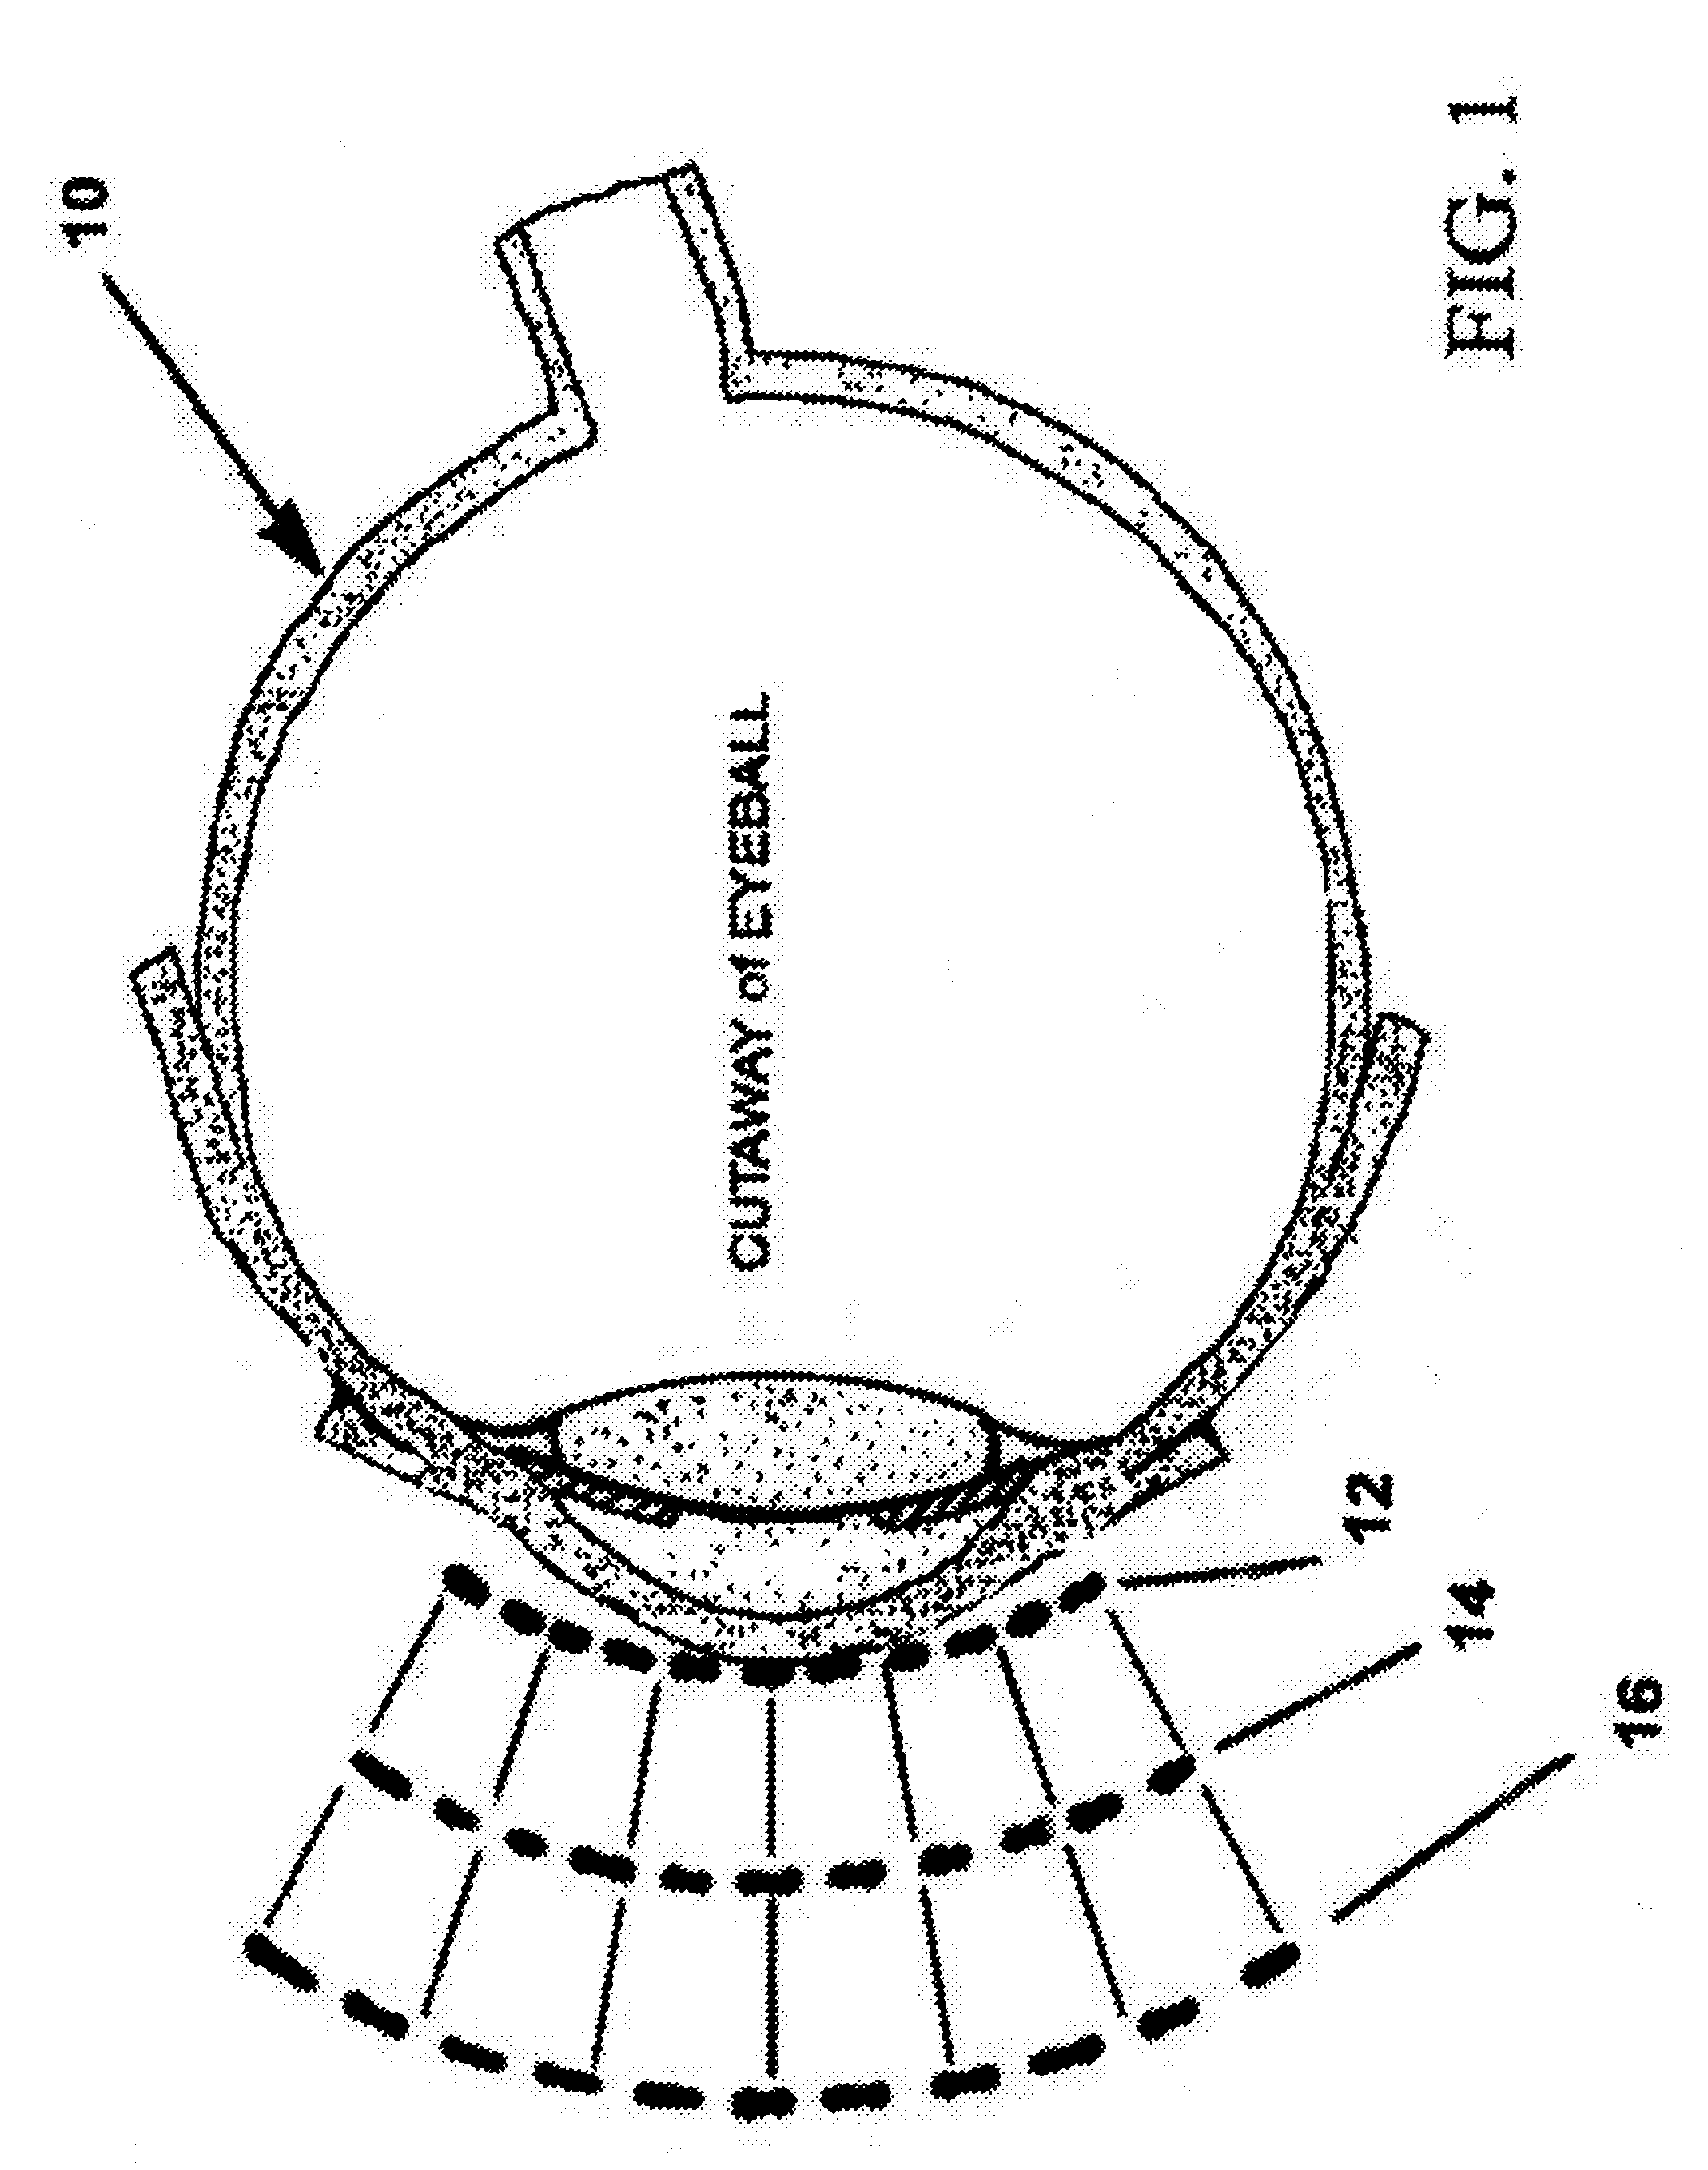 Toric-shaped lenses and goggle assembly